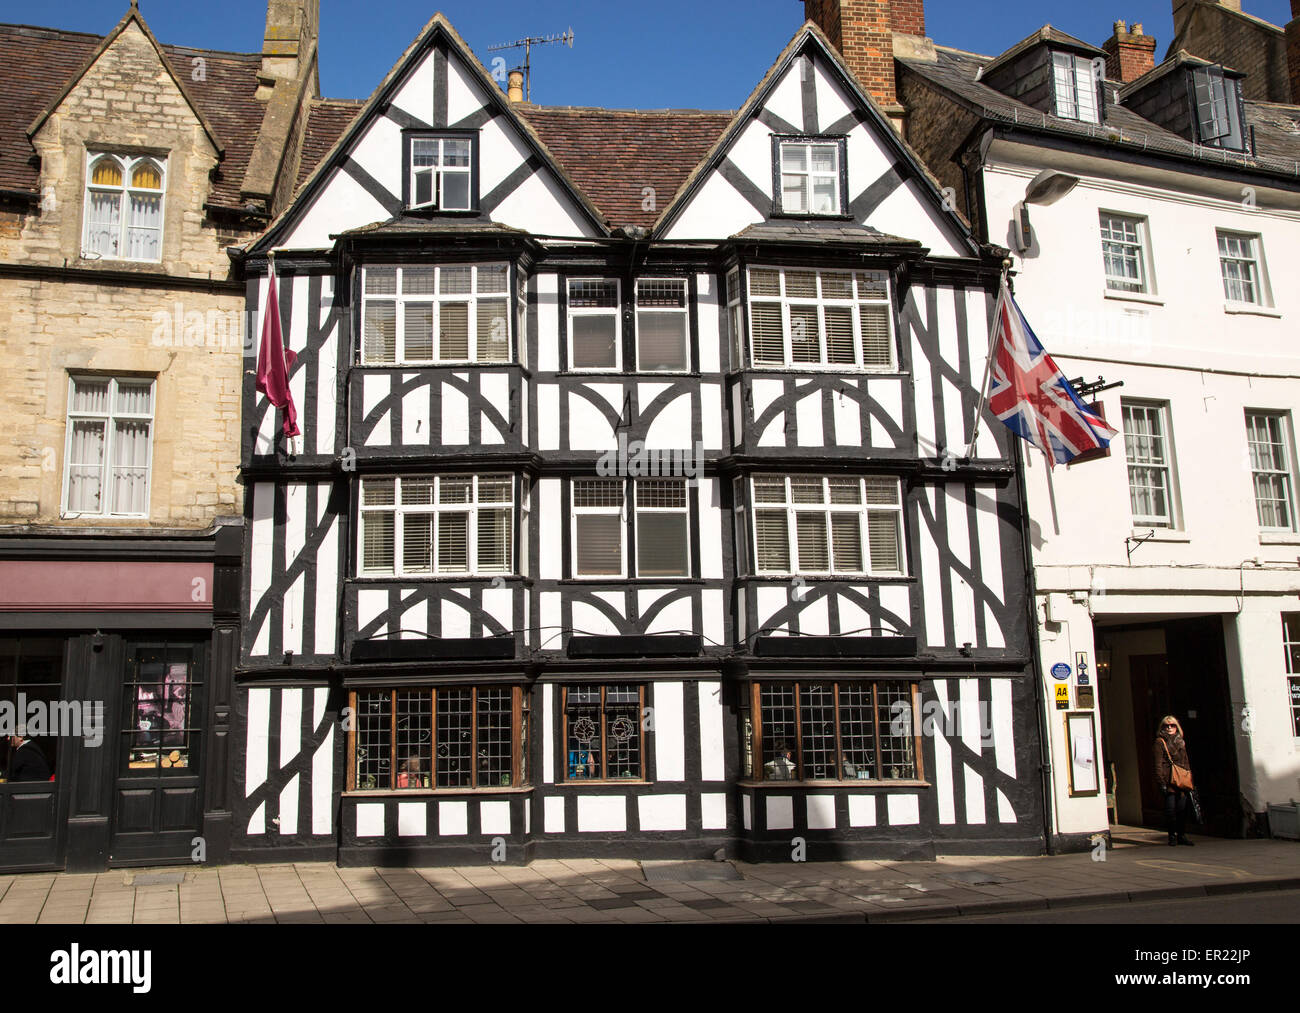 Historic building the Fleece hotel in the town centre, Cirencester, Gloucestershire, England, UK, Stock Photo